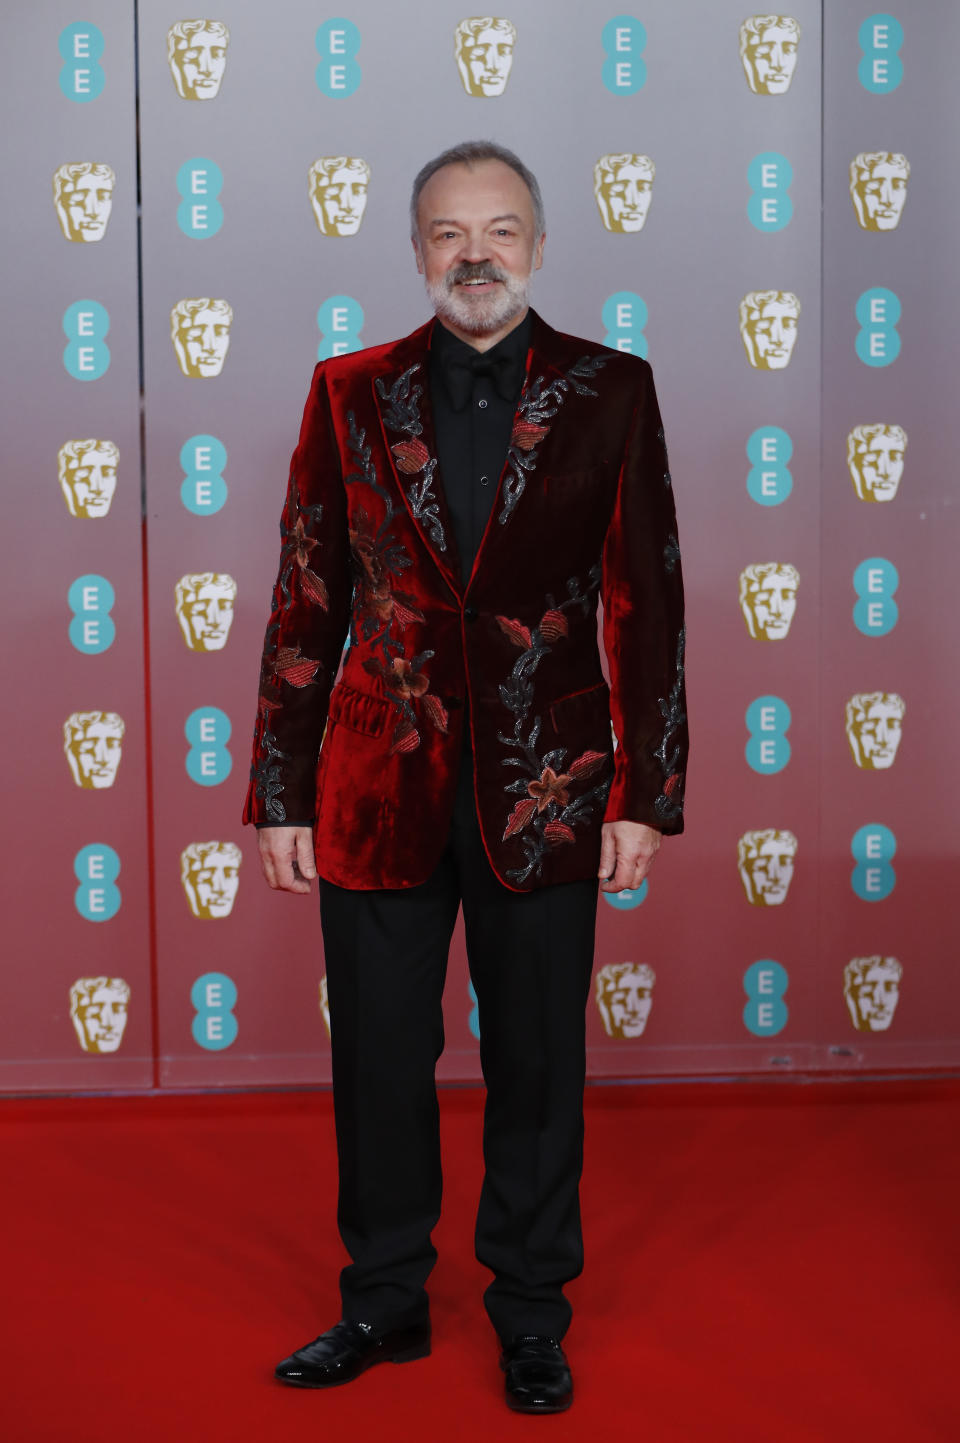 Graham Norton wore a statement red velvet suit jacket for the evening